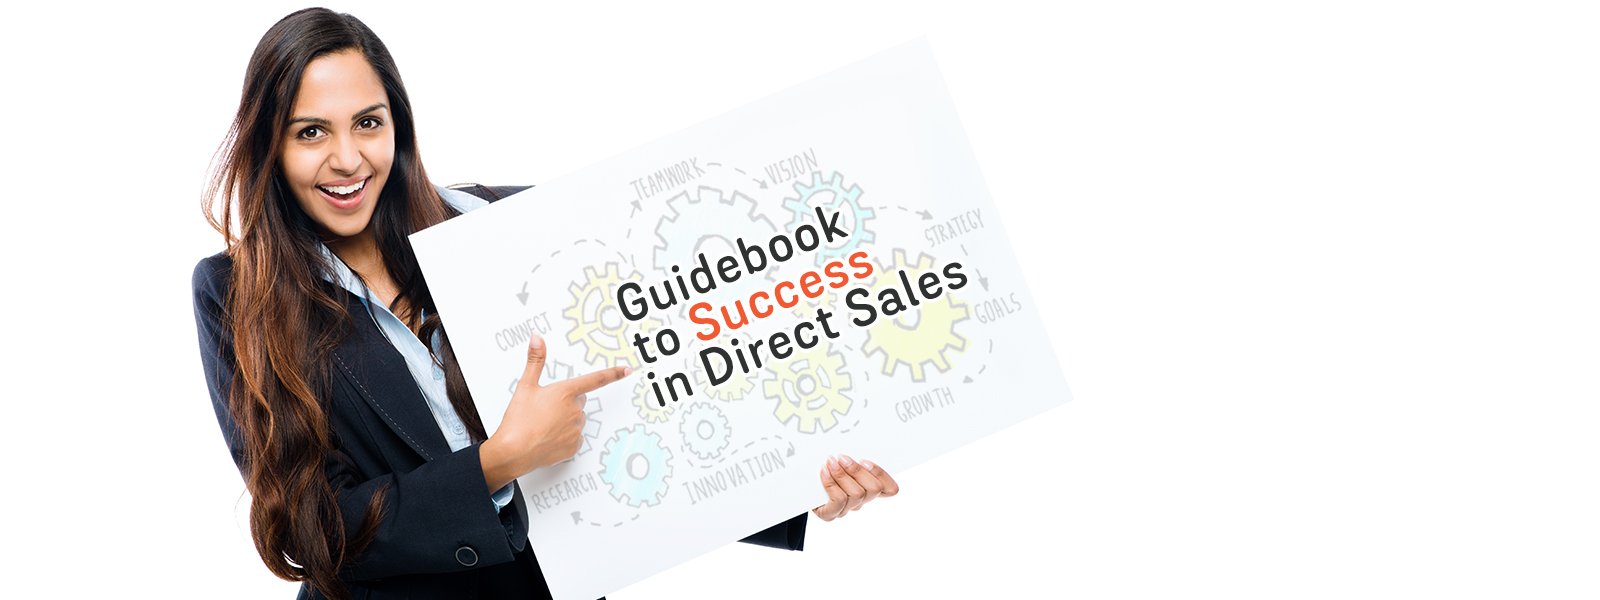 Your Guidebook to Success in Direct Sales